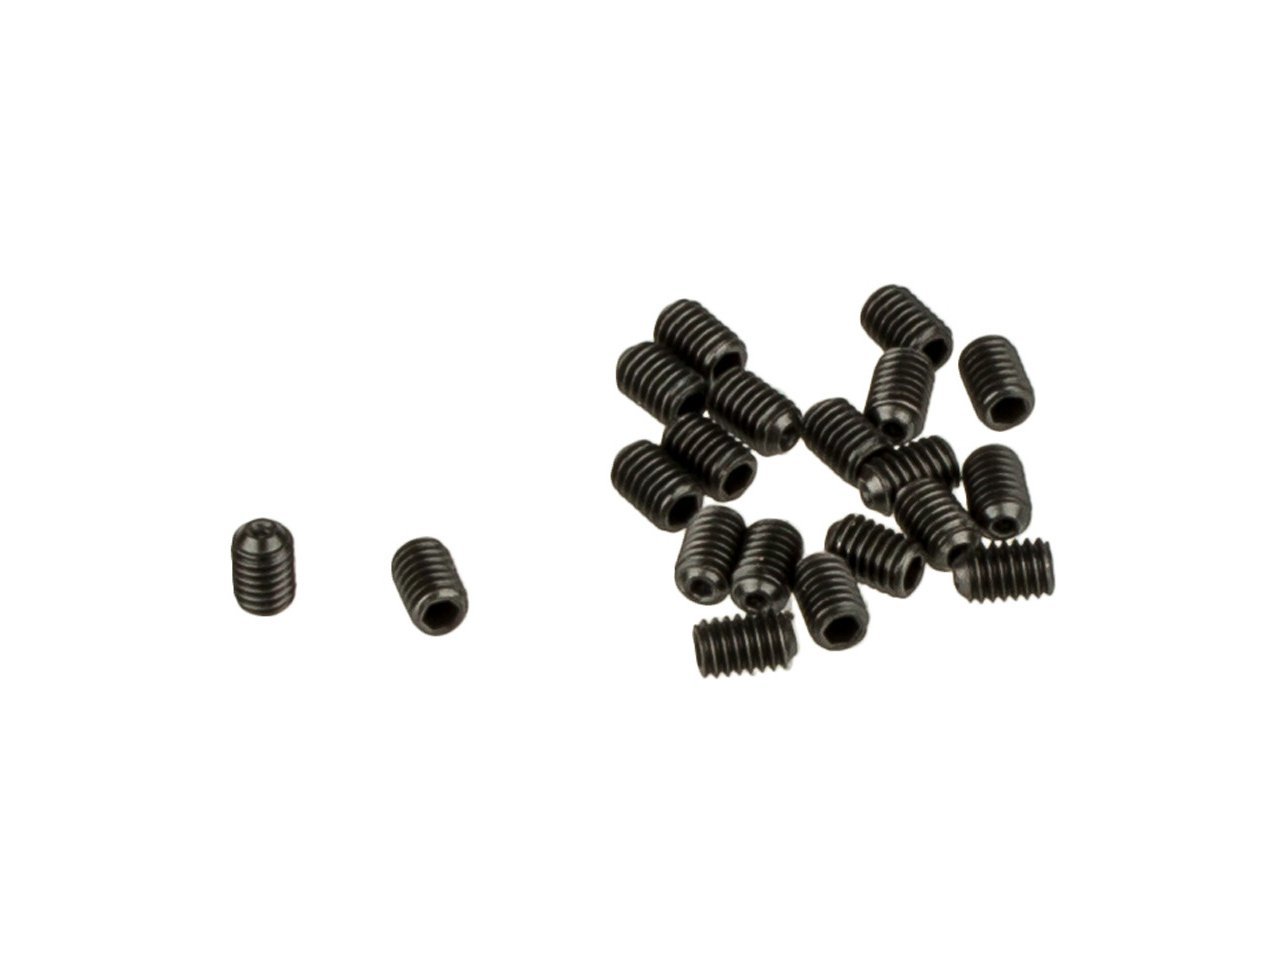 HT Components X1 Replacement Pins - M4x6mm - Black